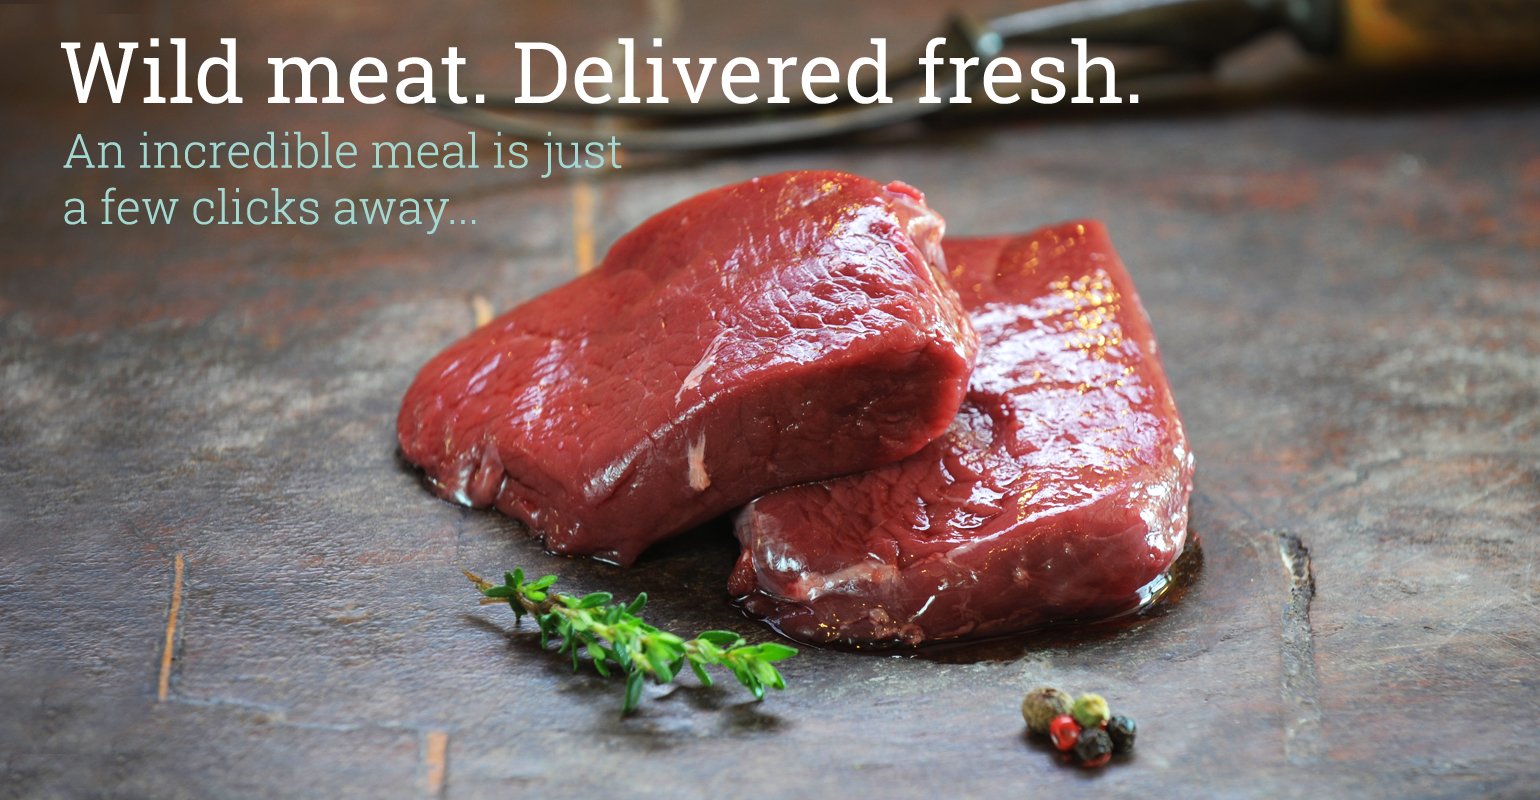 Welcome: Wild Meat. Delivered fresh.